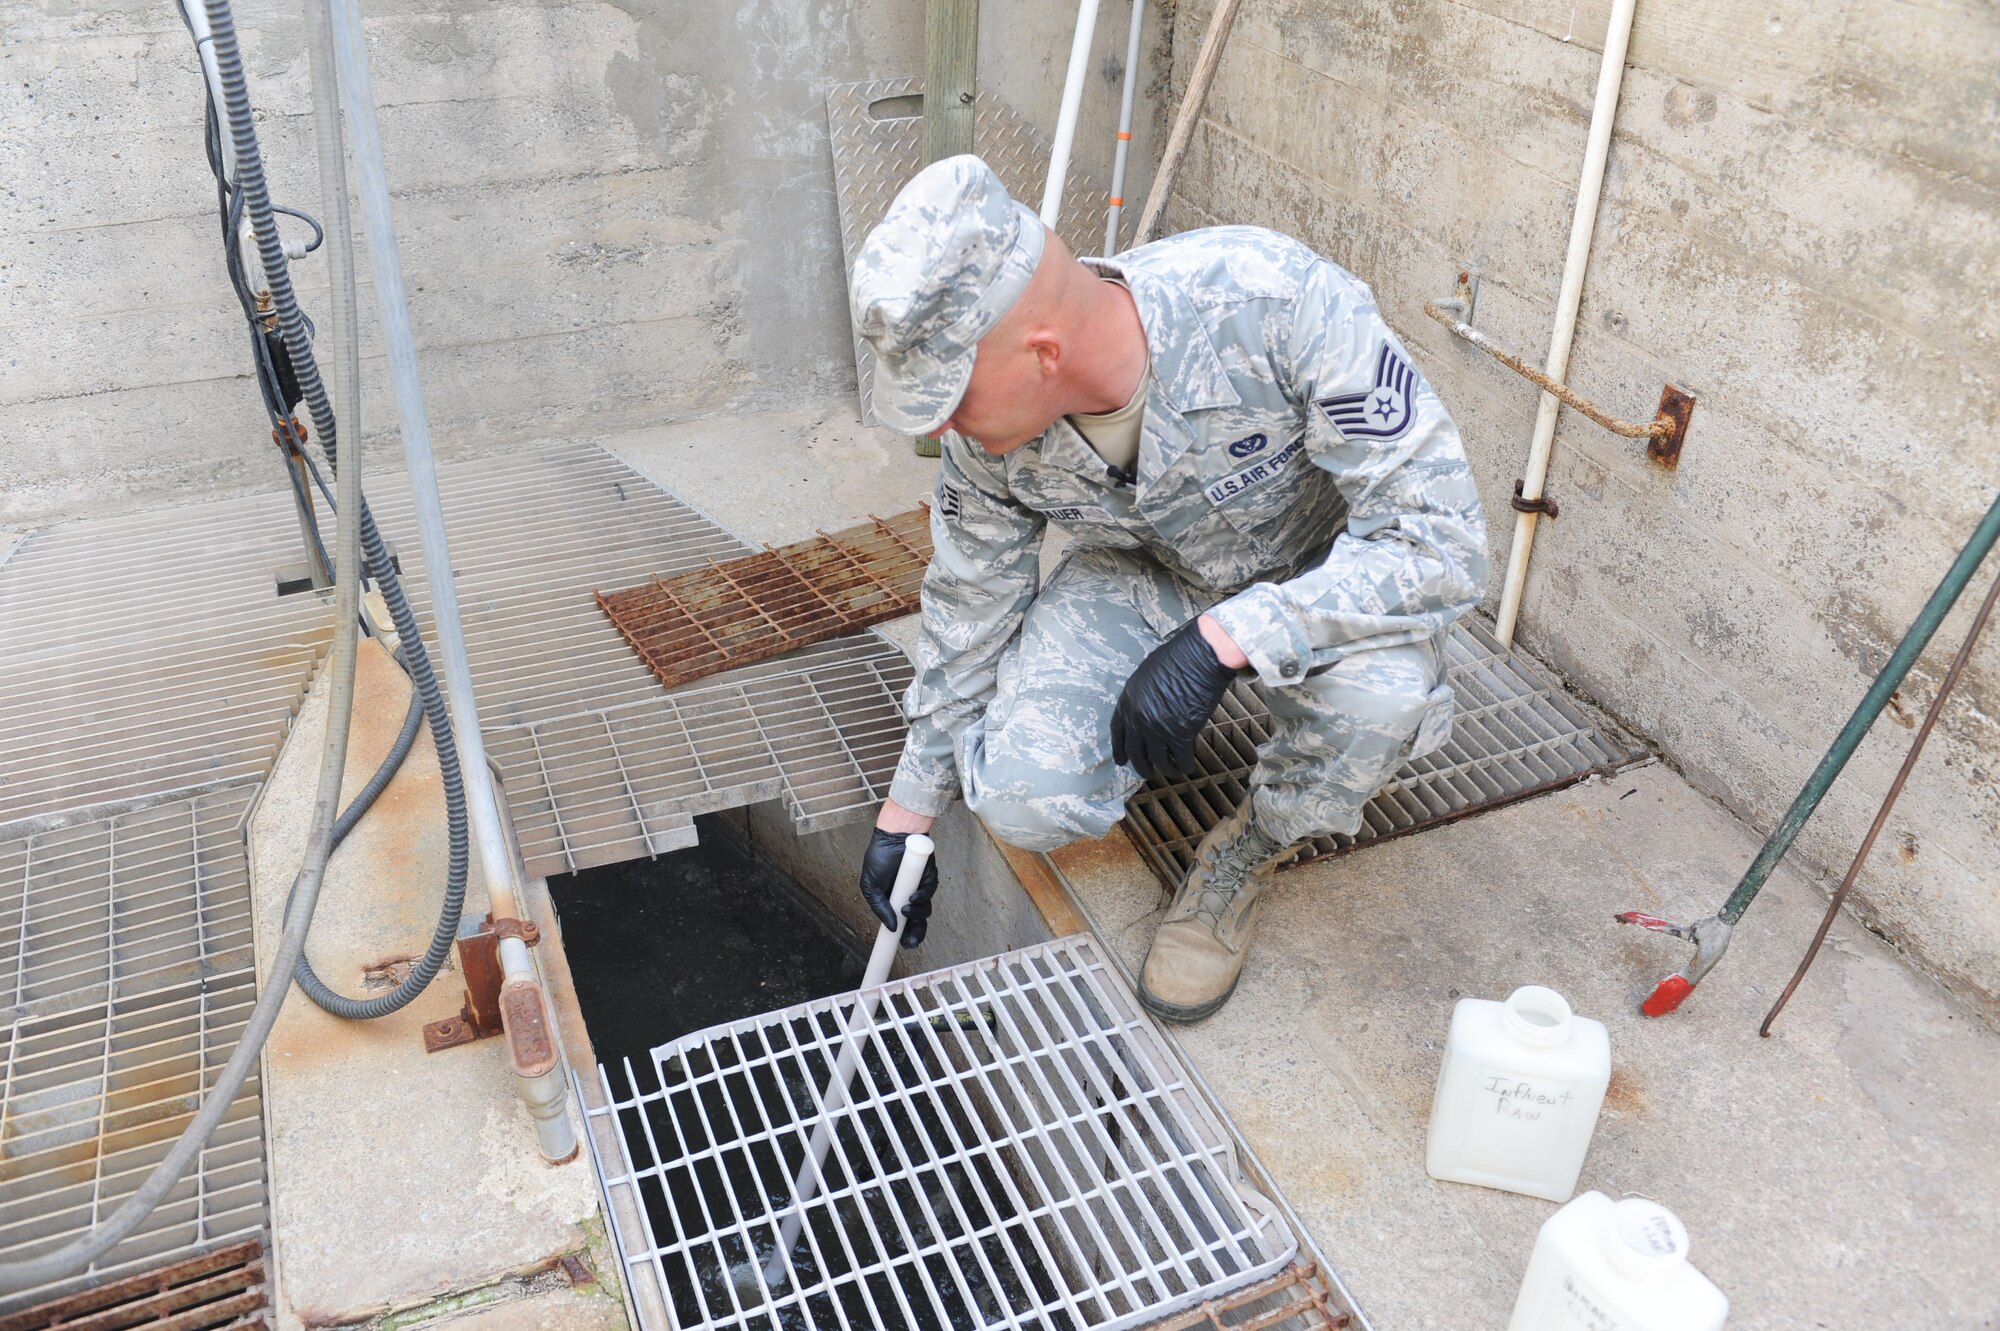 Staff Sgt. Paul Bauer, 9th Civil Engineer Squadron water and fuels system maintenance journeyman, collects a sample of bio-solids at the waste water facility on Beale Air Force Base, Calif., March 5, 2013. The facility safely treats waste water on Beale and provides clean drinking water. (U.S. Air Force photo by Airman 1st Class Bobby Cummings/Released)